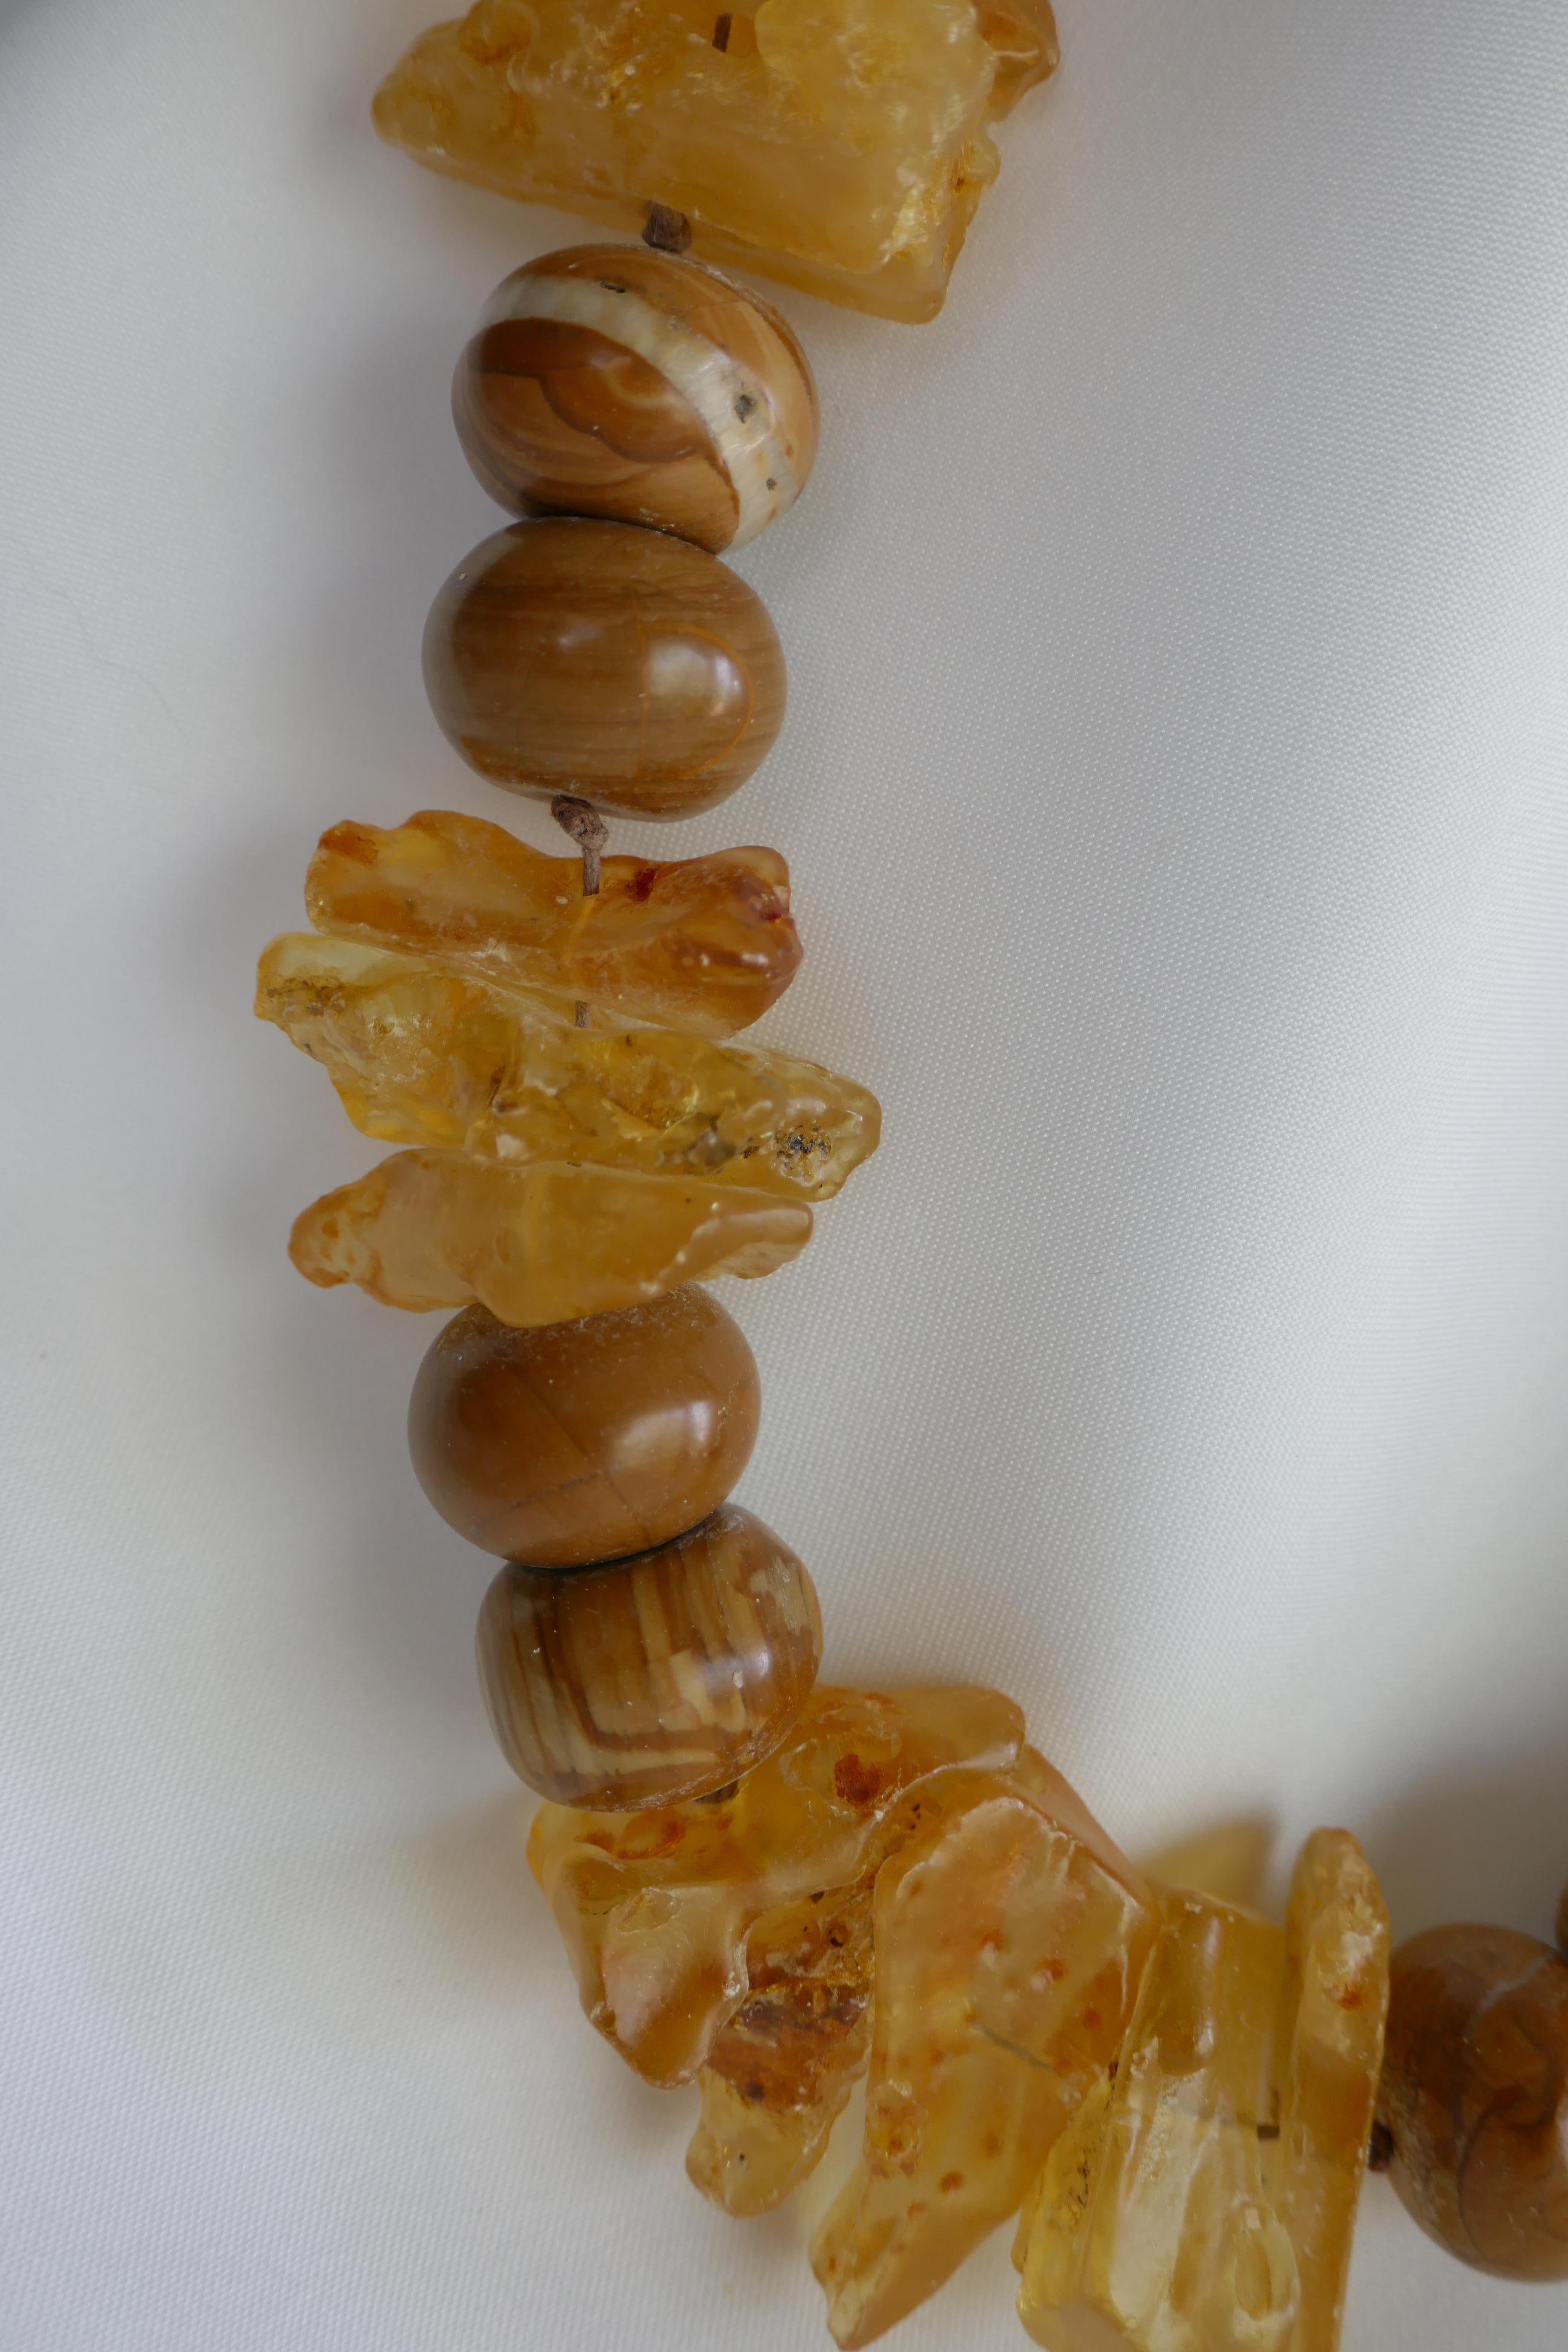 This necklace is definitely a statement piece which combines chunks of amber (yellow) and 20mm wood line jasper,  knotted on cotton cord. This necklace may be worn year round. It is a sculptural piece that looks amazing on and compliments many